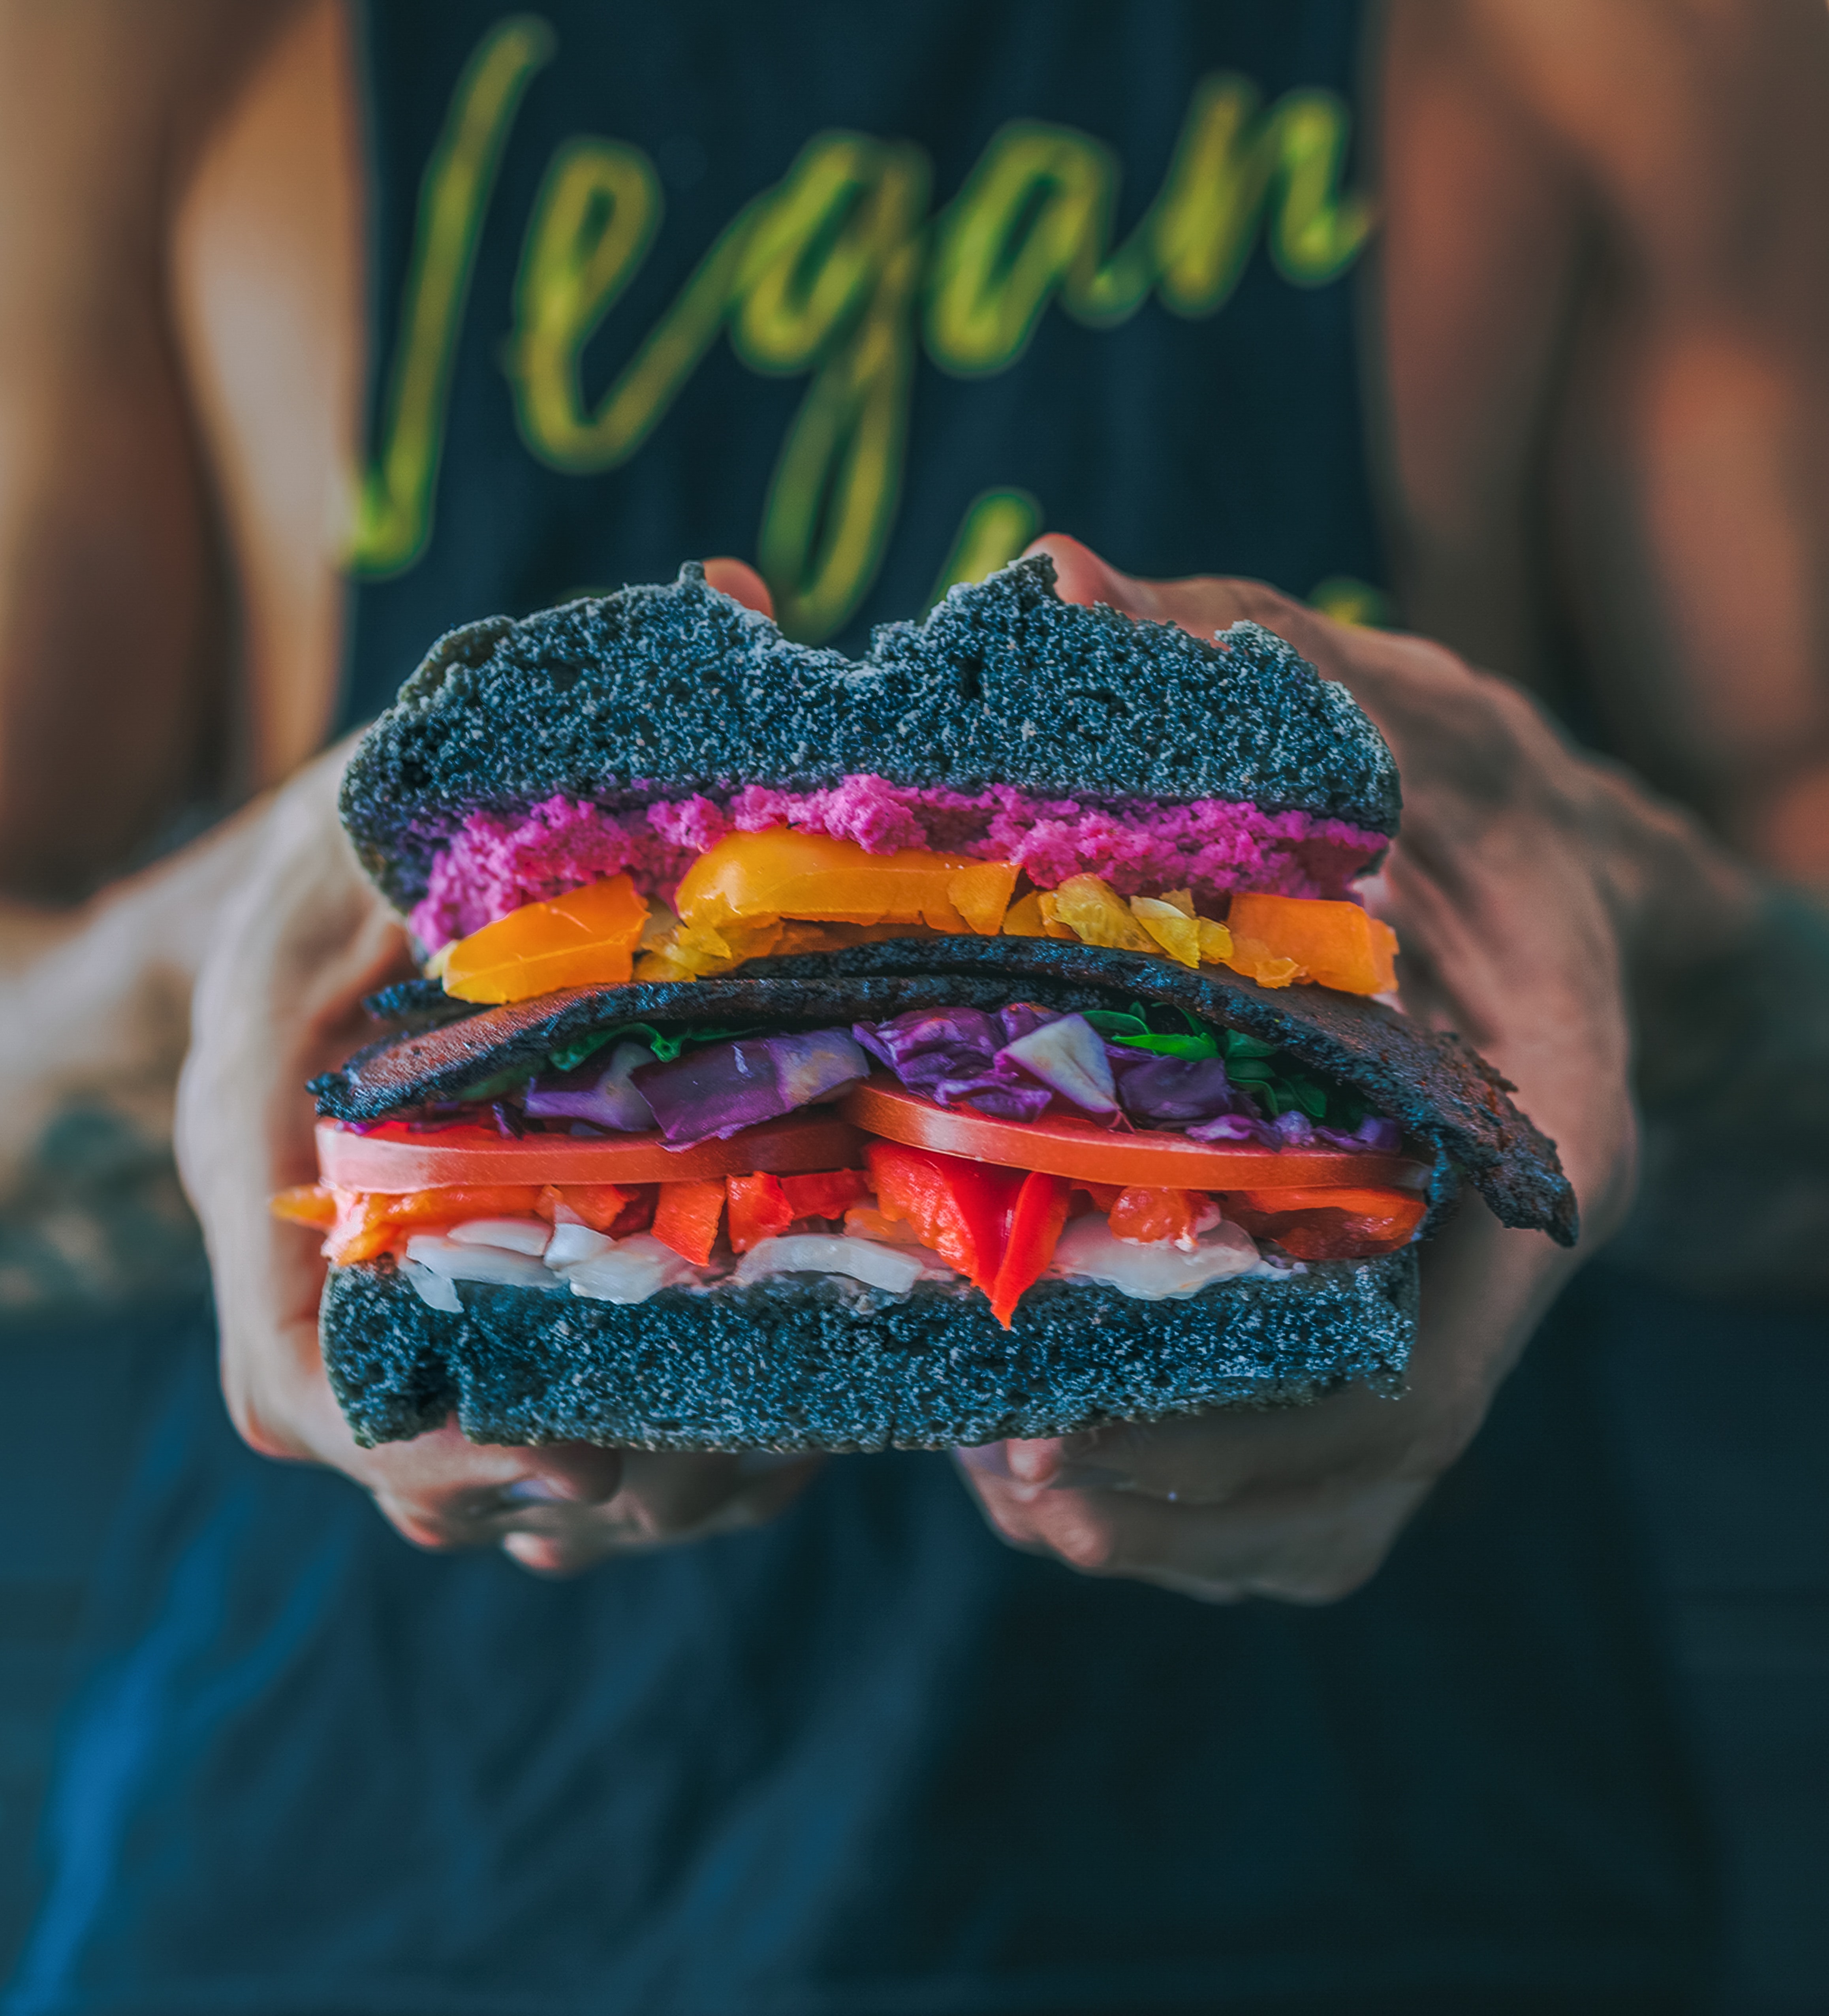 Man in black top that says vegan holding a veggie sandwich with black buns